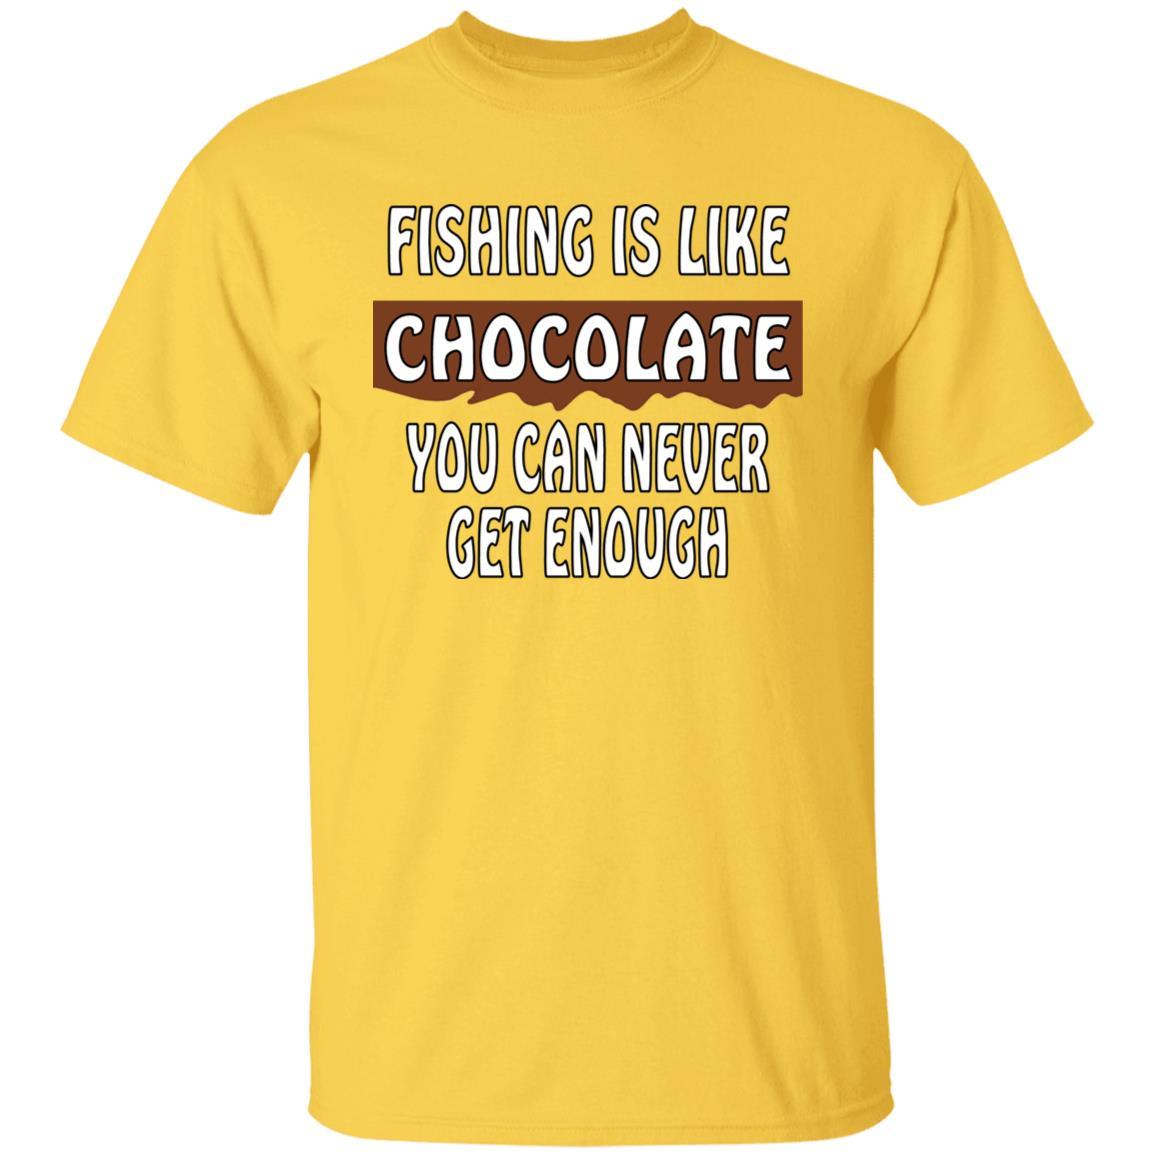 Fishing is like chocolate you can never get enough t-shirt daisy